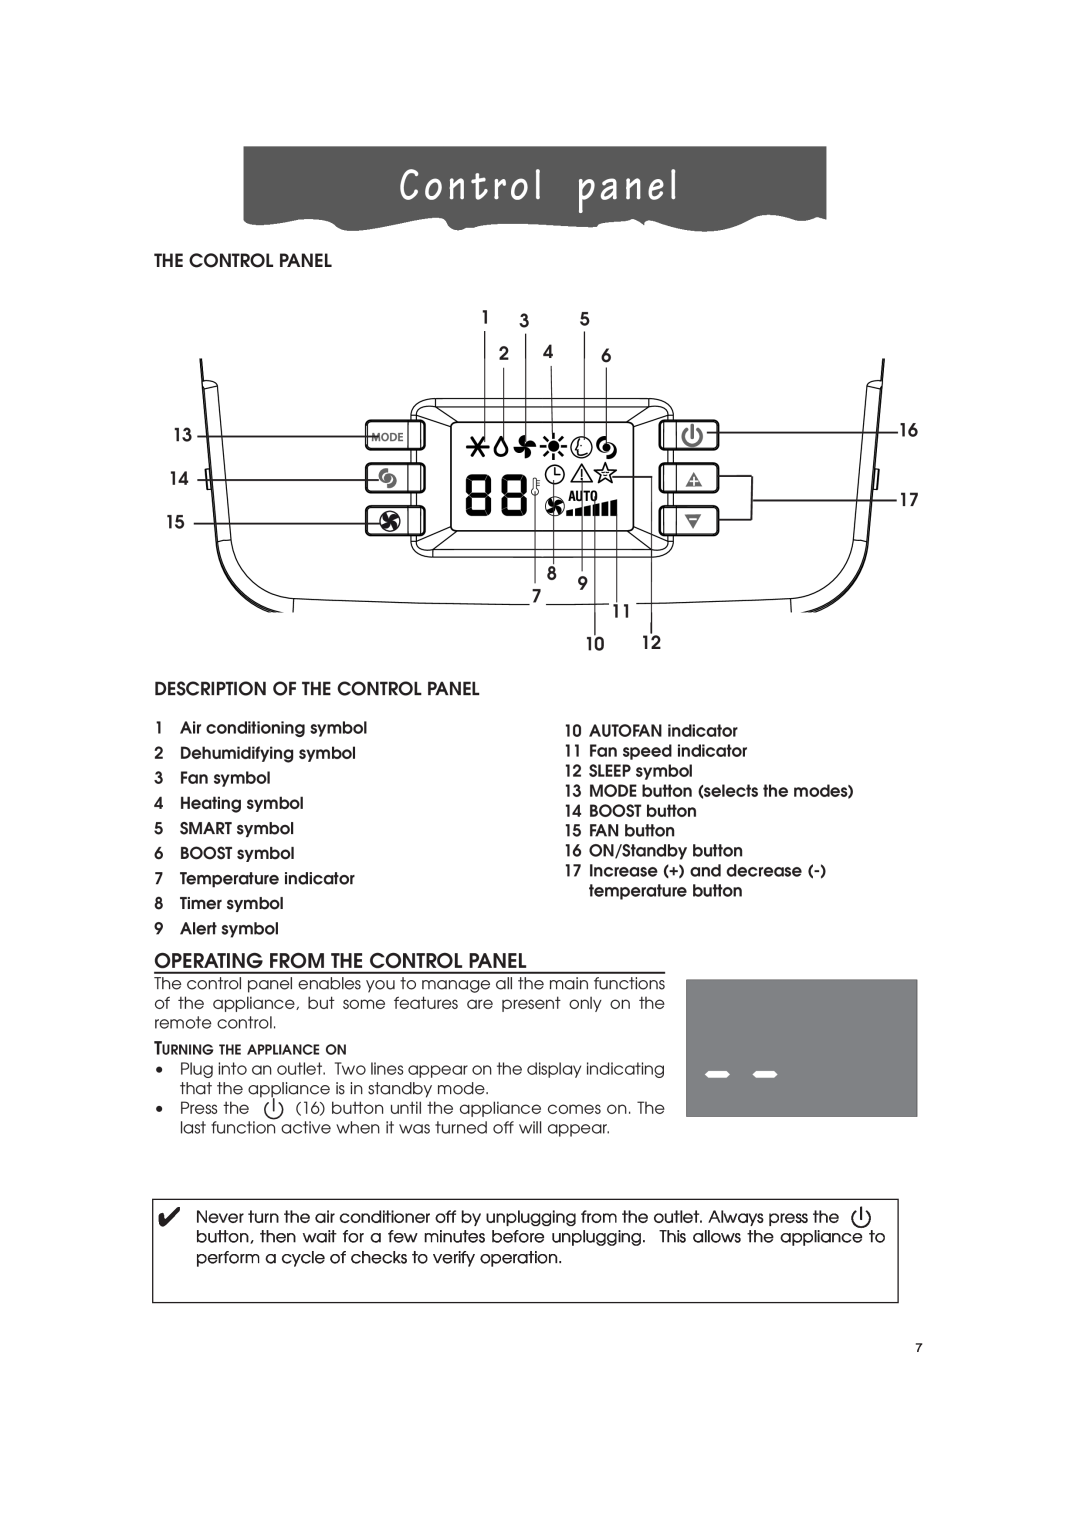 DeLonghi PAC-A130HPE instruction manual Control panel, Operating From The Control Panel 